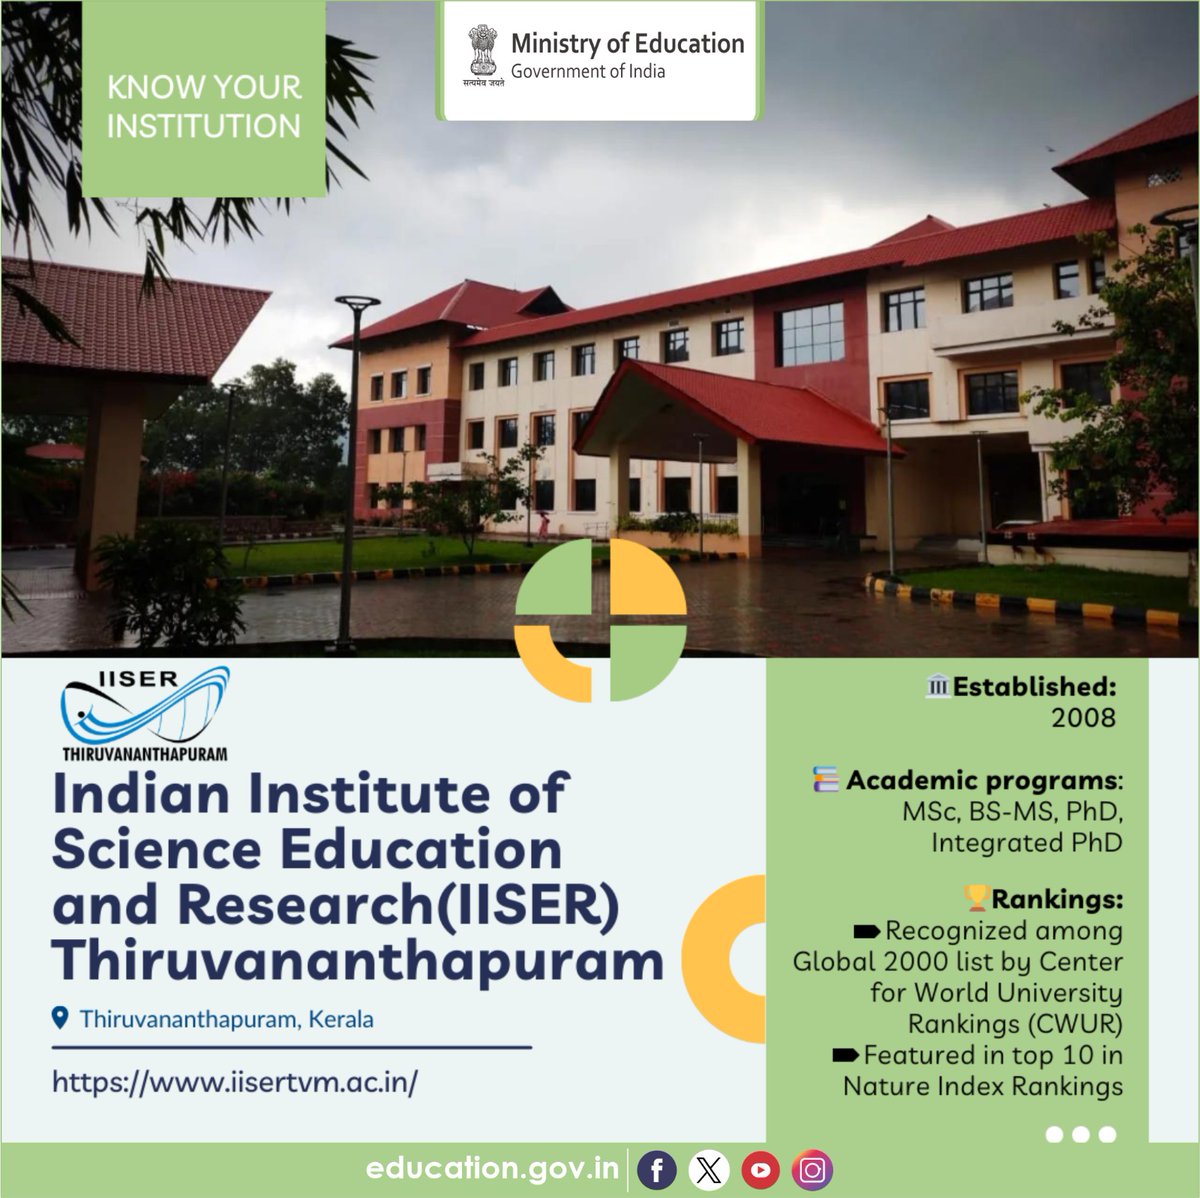 Know about the HEIs of India! Established in 2008, Indian Institute of Science Education and Research Thiruvananthapuram (IISER TVM) adheres to global standards in scientific research and education. Faculty members conduct pioneering research in basic sciences, utilizing…